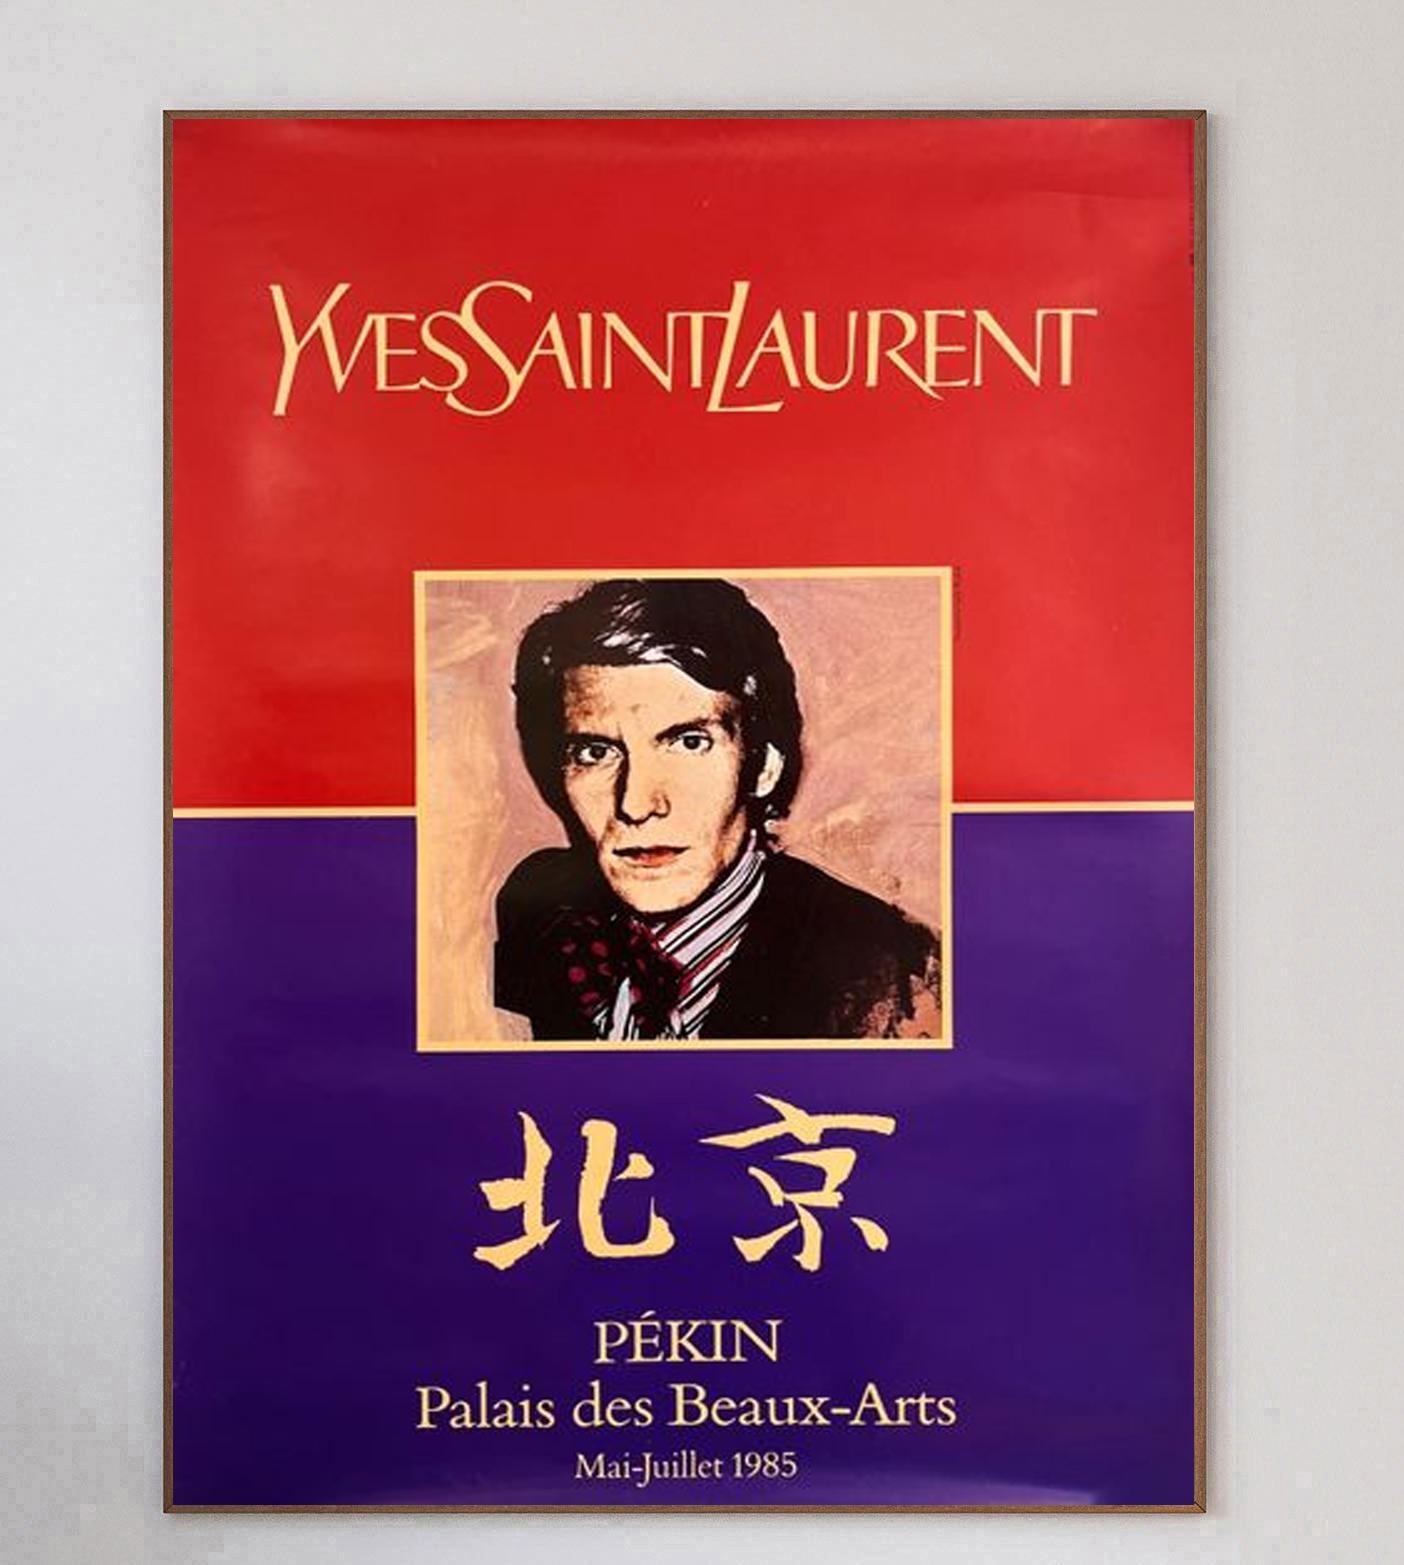 Gorgeous poster created in promotion of the 25 year retrospective exhibition of Yves Saint Laurent at the Palais des Beaux-Arts in Beijing, China - or Pekin as it was formerly known. This vibrant poster with gold features a portrait of the iconic